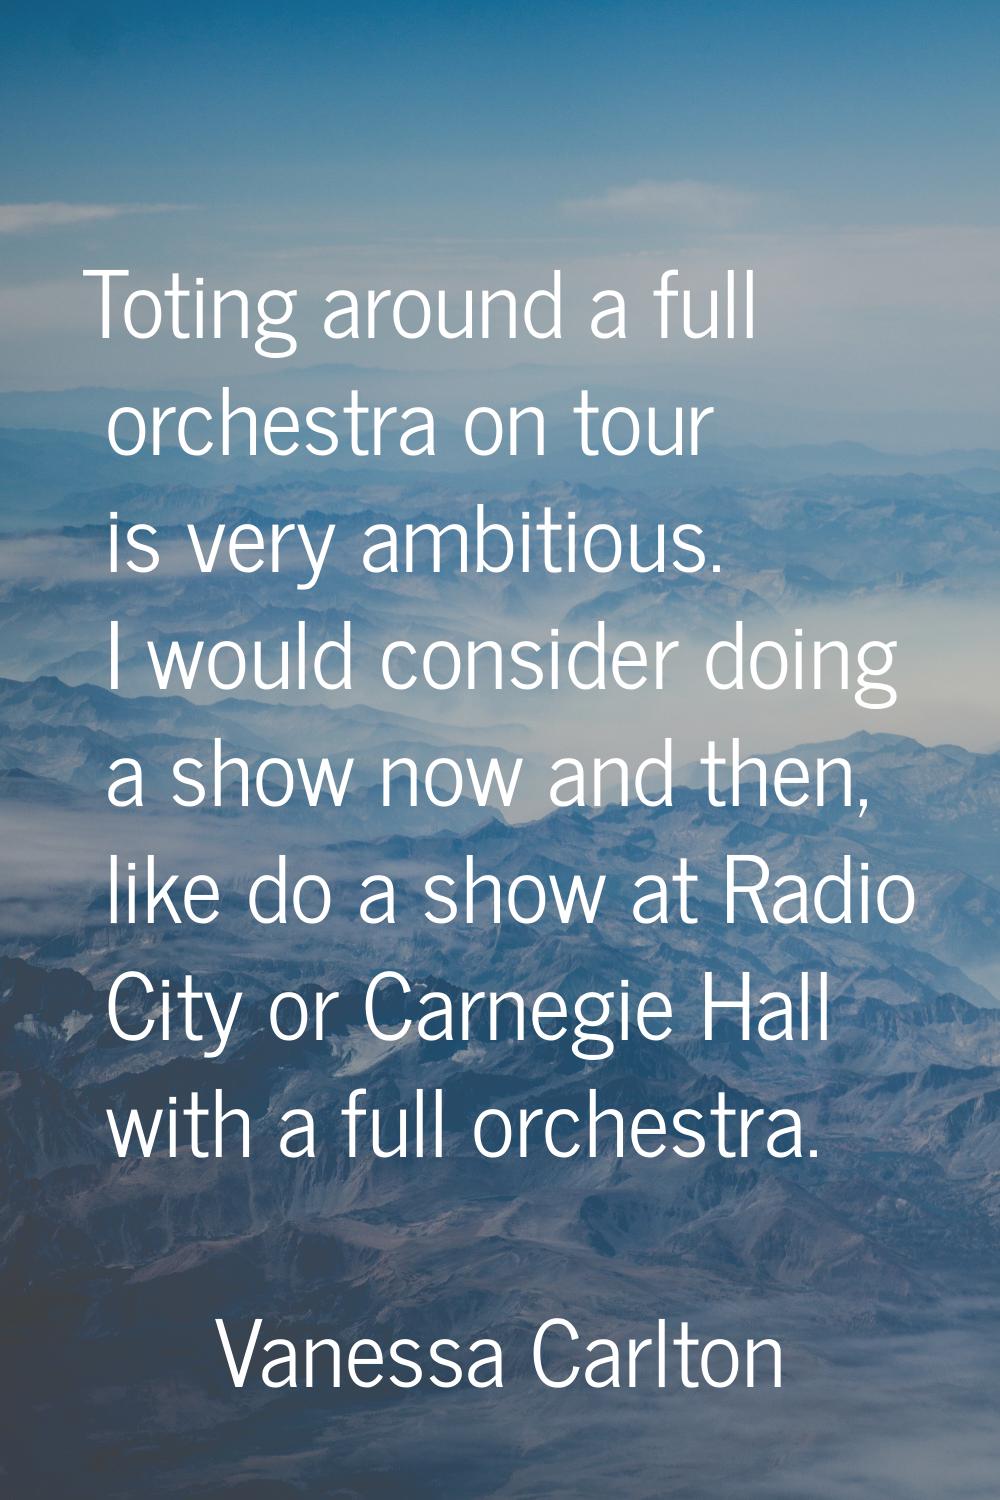 Toting around a full orchestra on tour is very ambitious. I would consider doing a show now and the